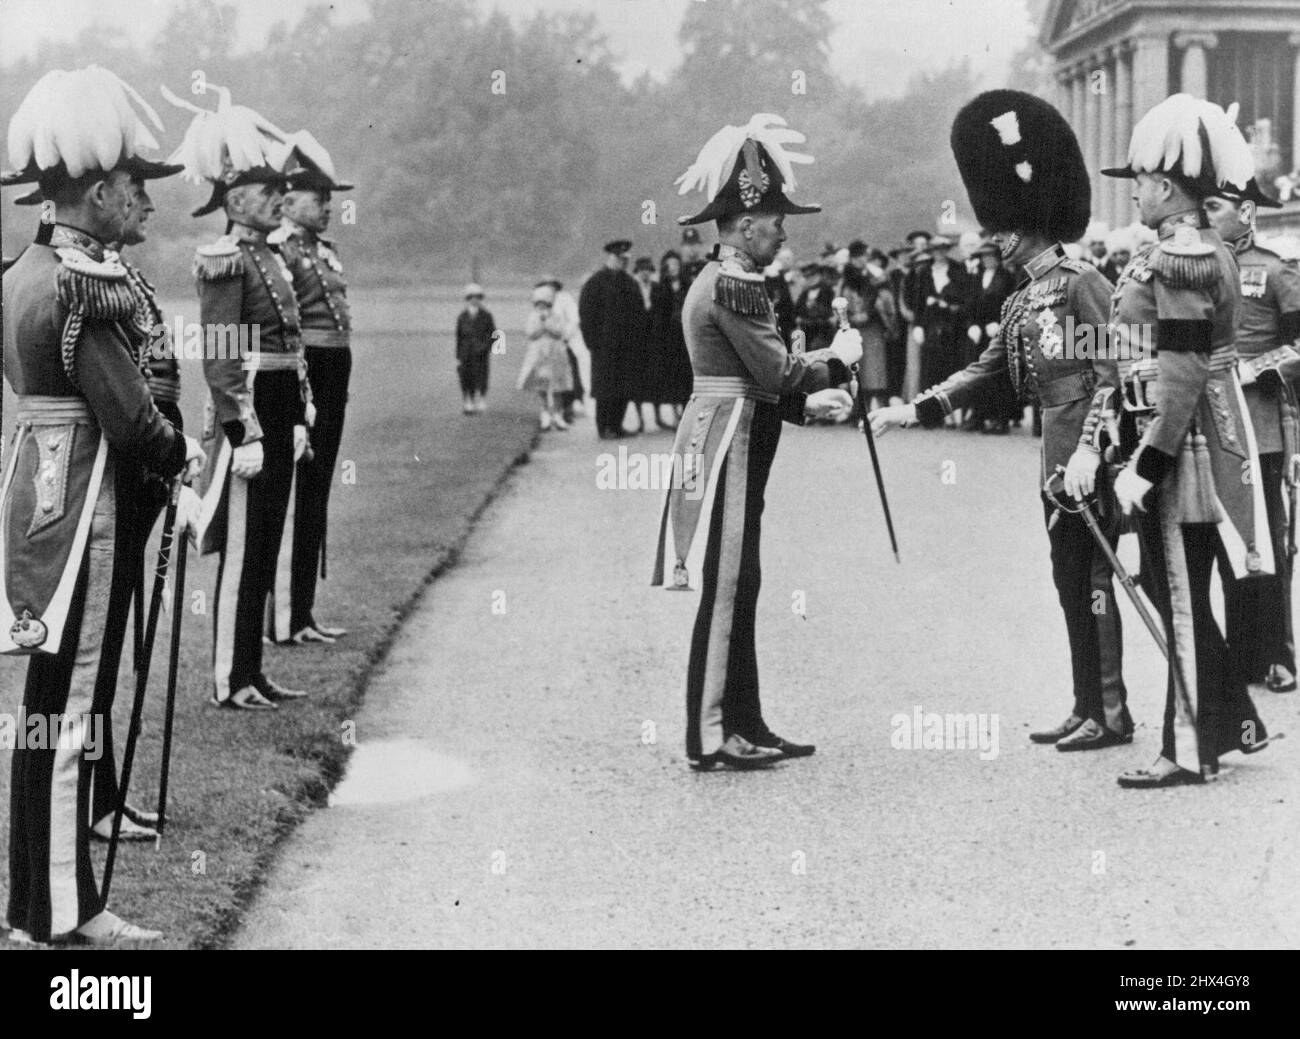 Official Photograph. H.M. The King Inspects the Yeomen of the Guard in the Grounds of Buckingham Place. This is the first time for many Years that the Reigning monarch has inspected this ancient body of men. H.M. the King Presenting the sticks of office of the officers of the King's Bodyguard of the Yeomen of the Guard in the grounds of Buckingham palace. The Royal Cypher on the Sticks has been altered from ' George V' to 'Edward VIII'. June 26, 1936. (Photo by Sport & General Press Agency, Limited). Stock Photo